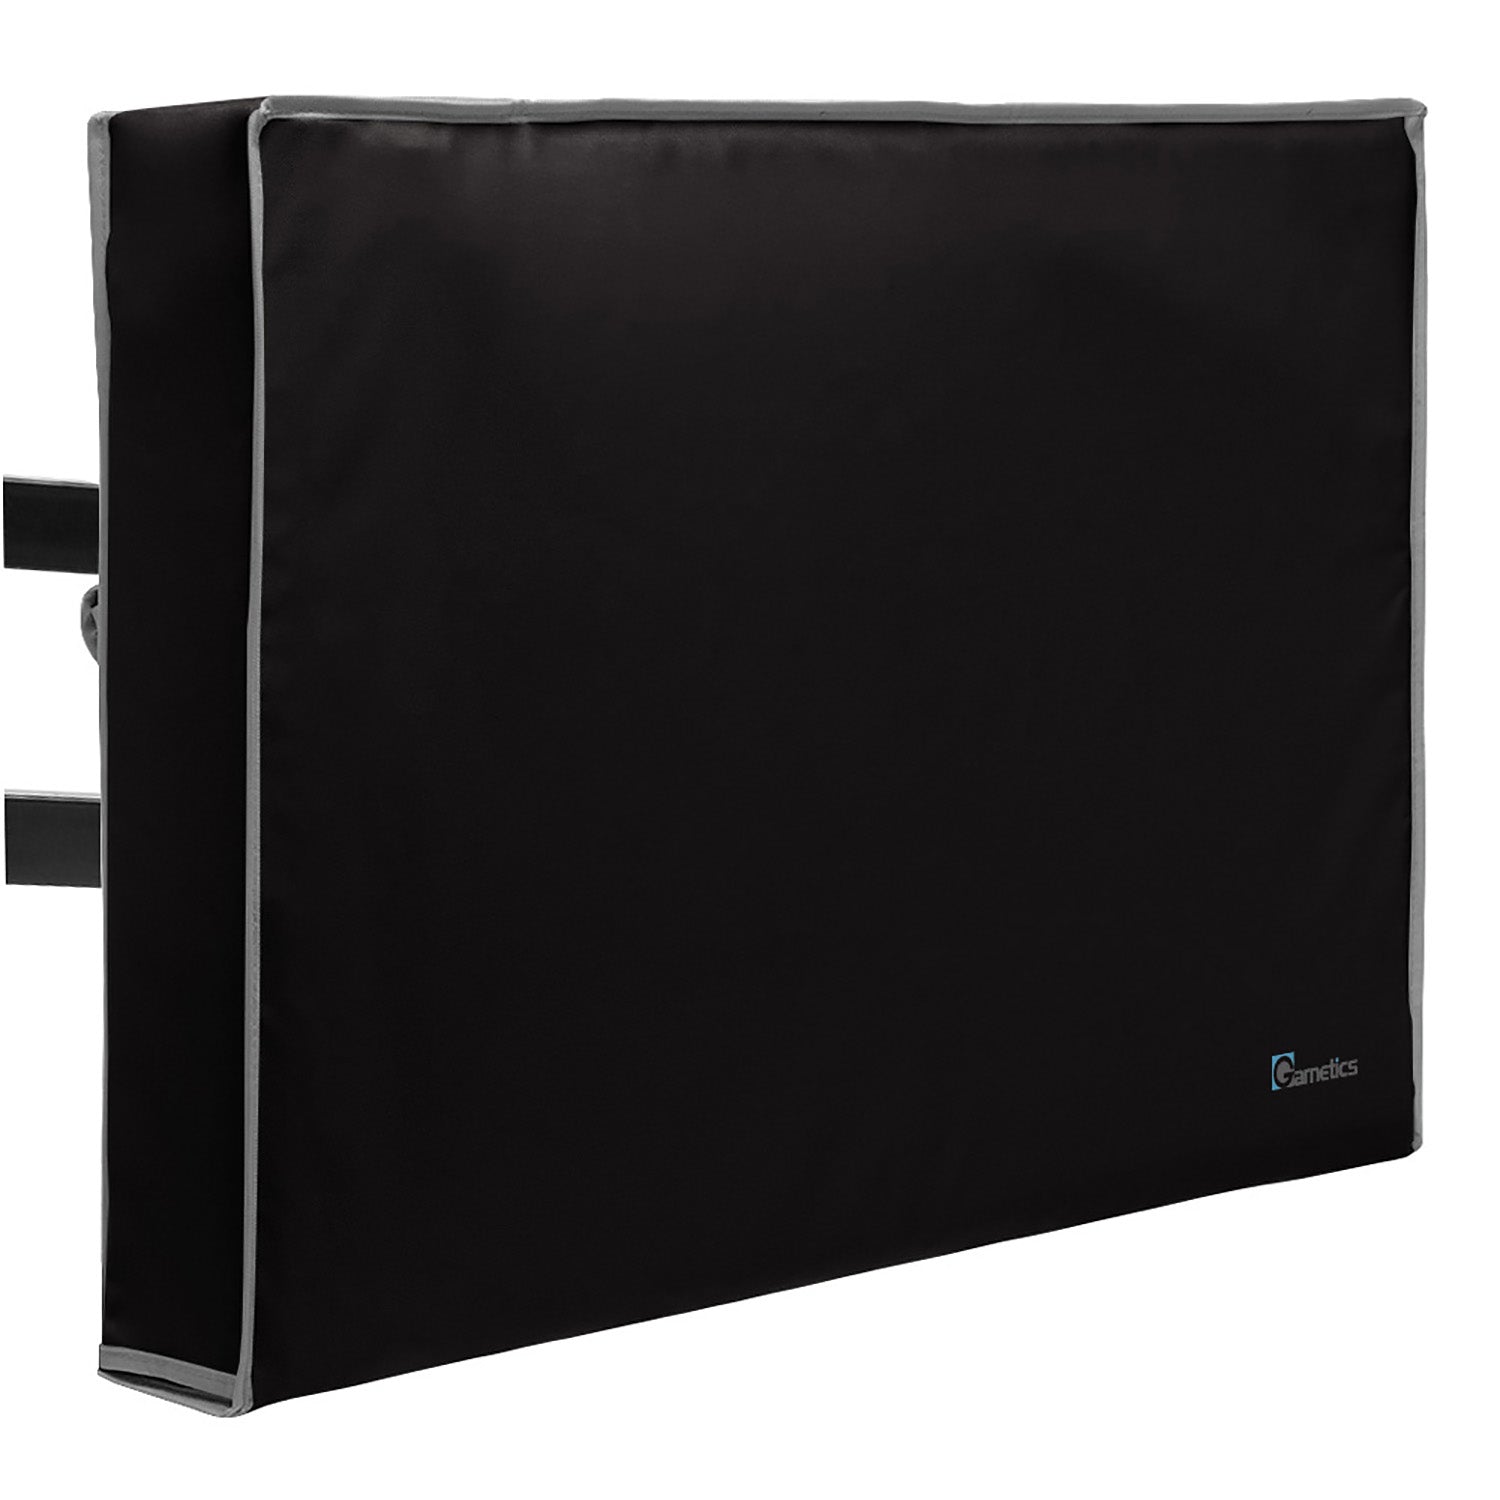 Black Outdoor TV Cover